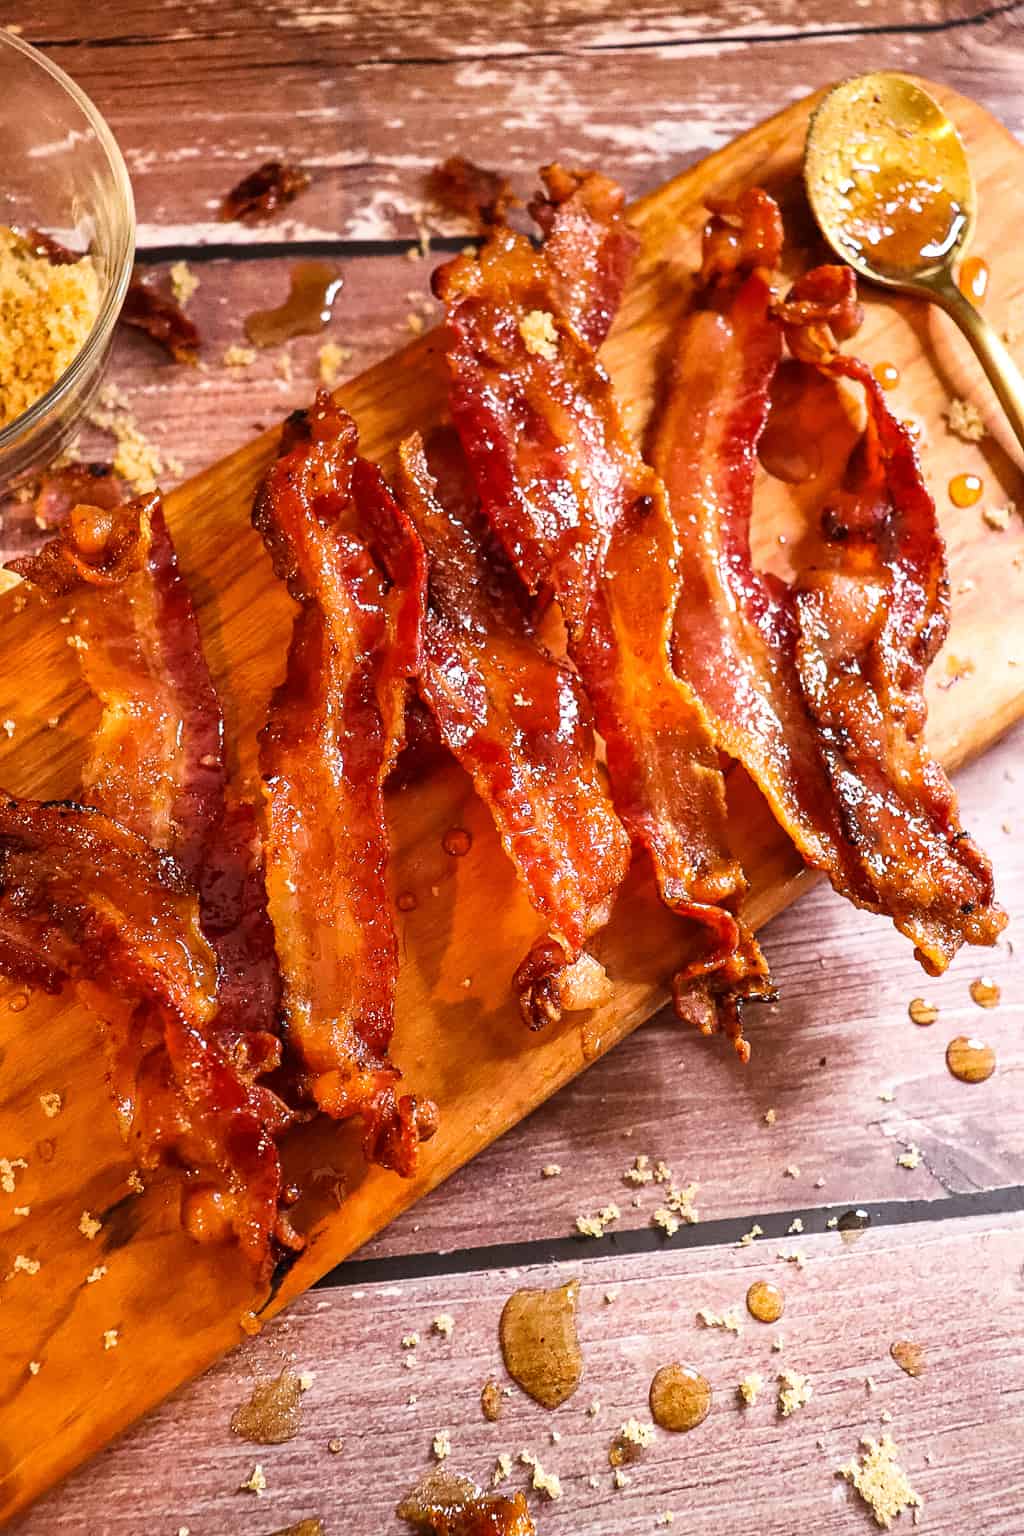 candied bacon laid out on a cutting board with a bowl of brown sugar next to it that is used as a photo prop